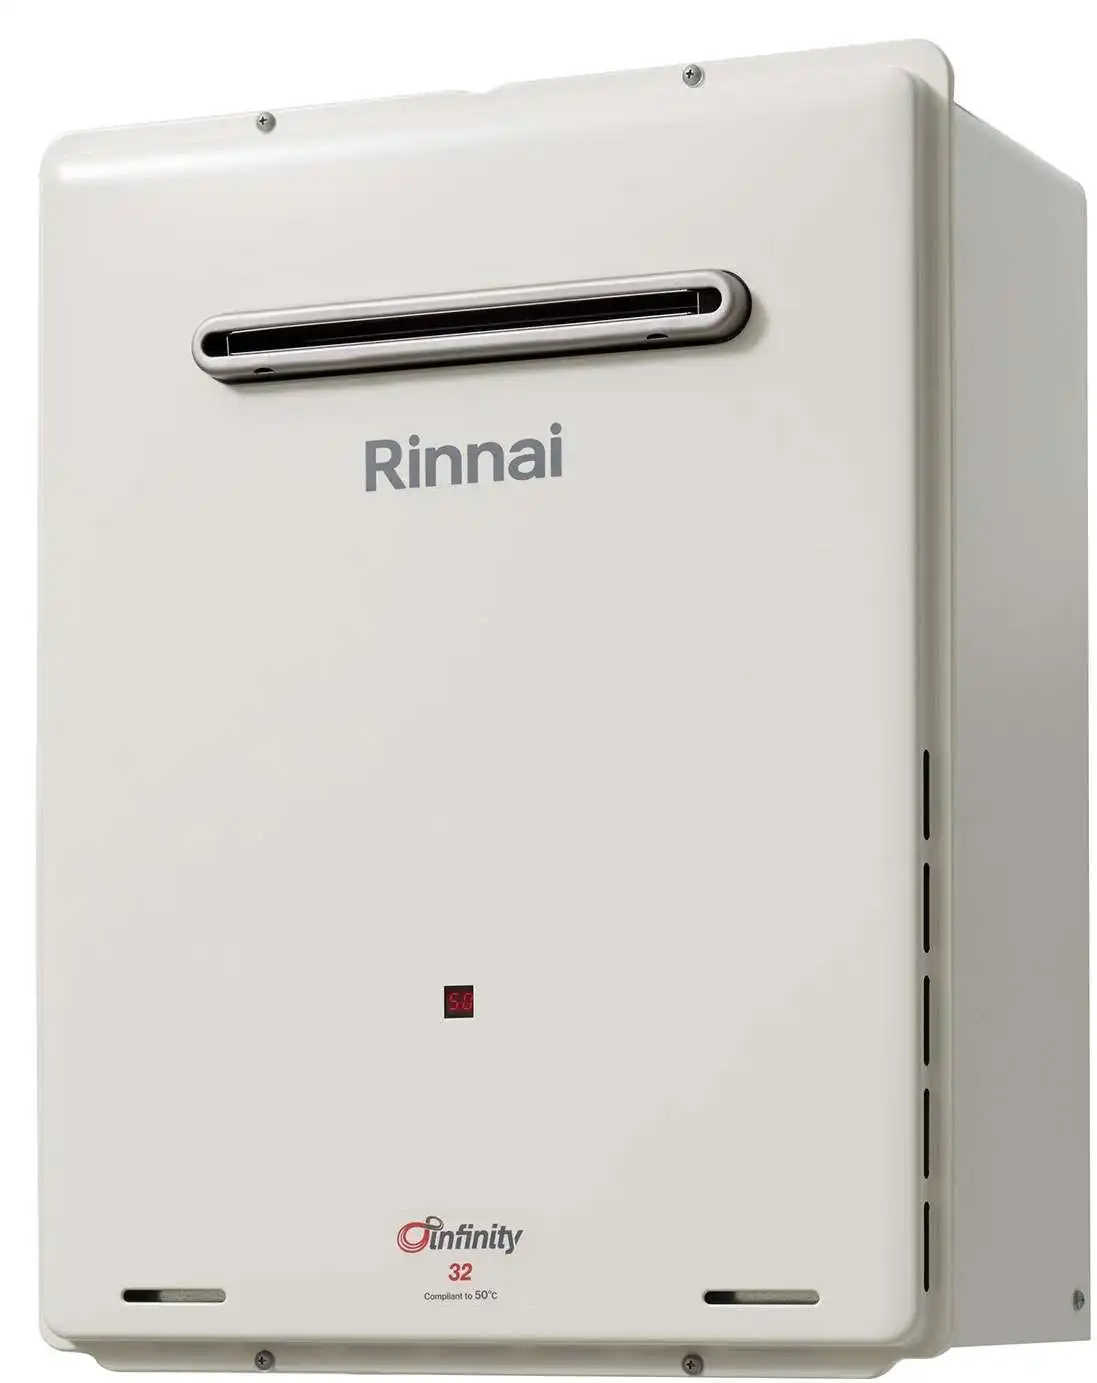 Rinnai Infinity 50oC 32L Instant Hot Water System INF32N50MA *NATURAL GAS*